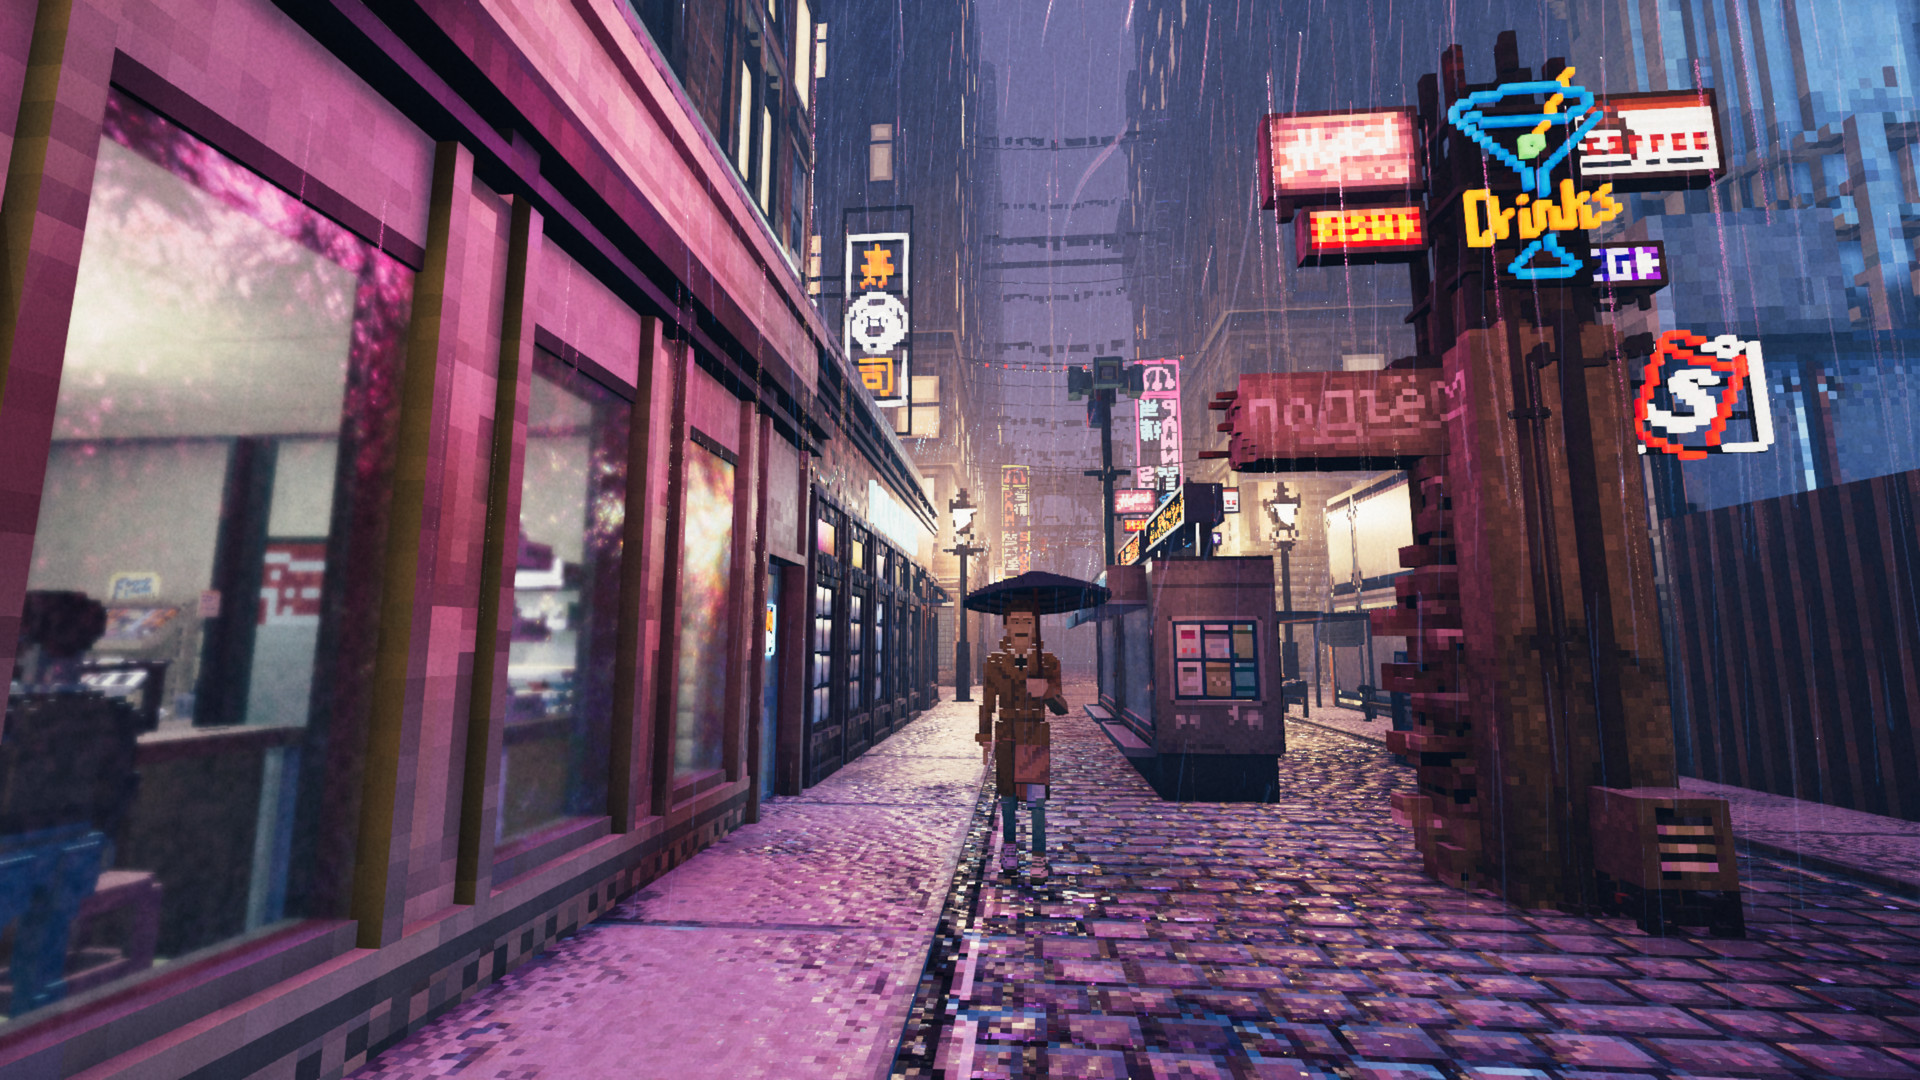 A screenshot from "Shadows of Doubt:" a person in a raincoat and umbrella stands on a rainy street of a neon-lit city